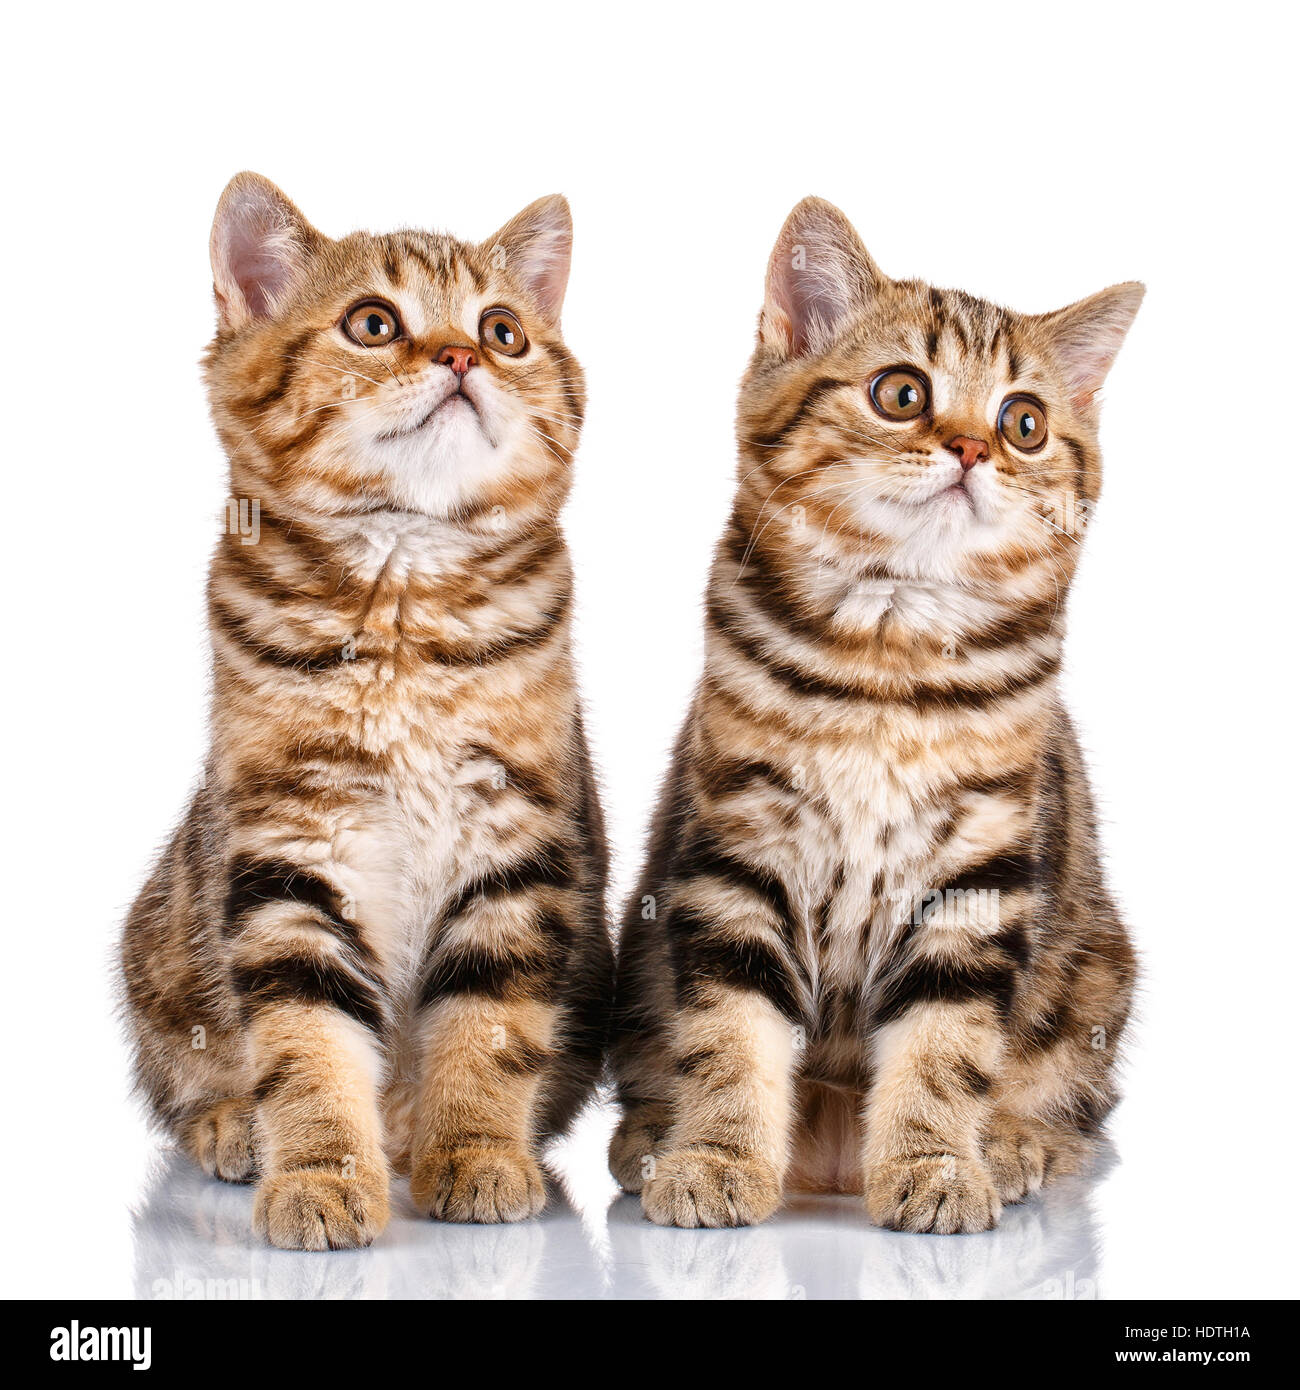 Two Striped Kittens On White Background Stock Photo Royalty Free